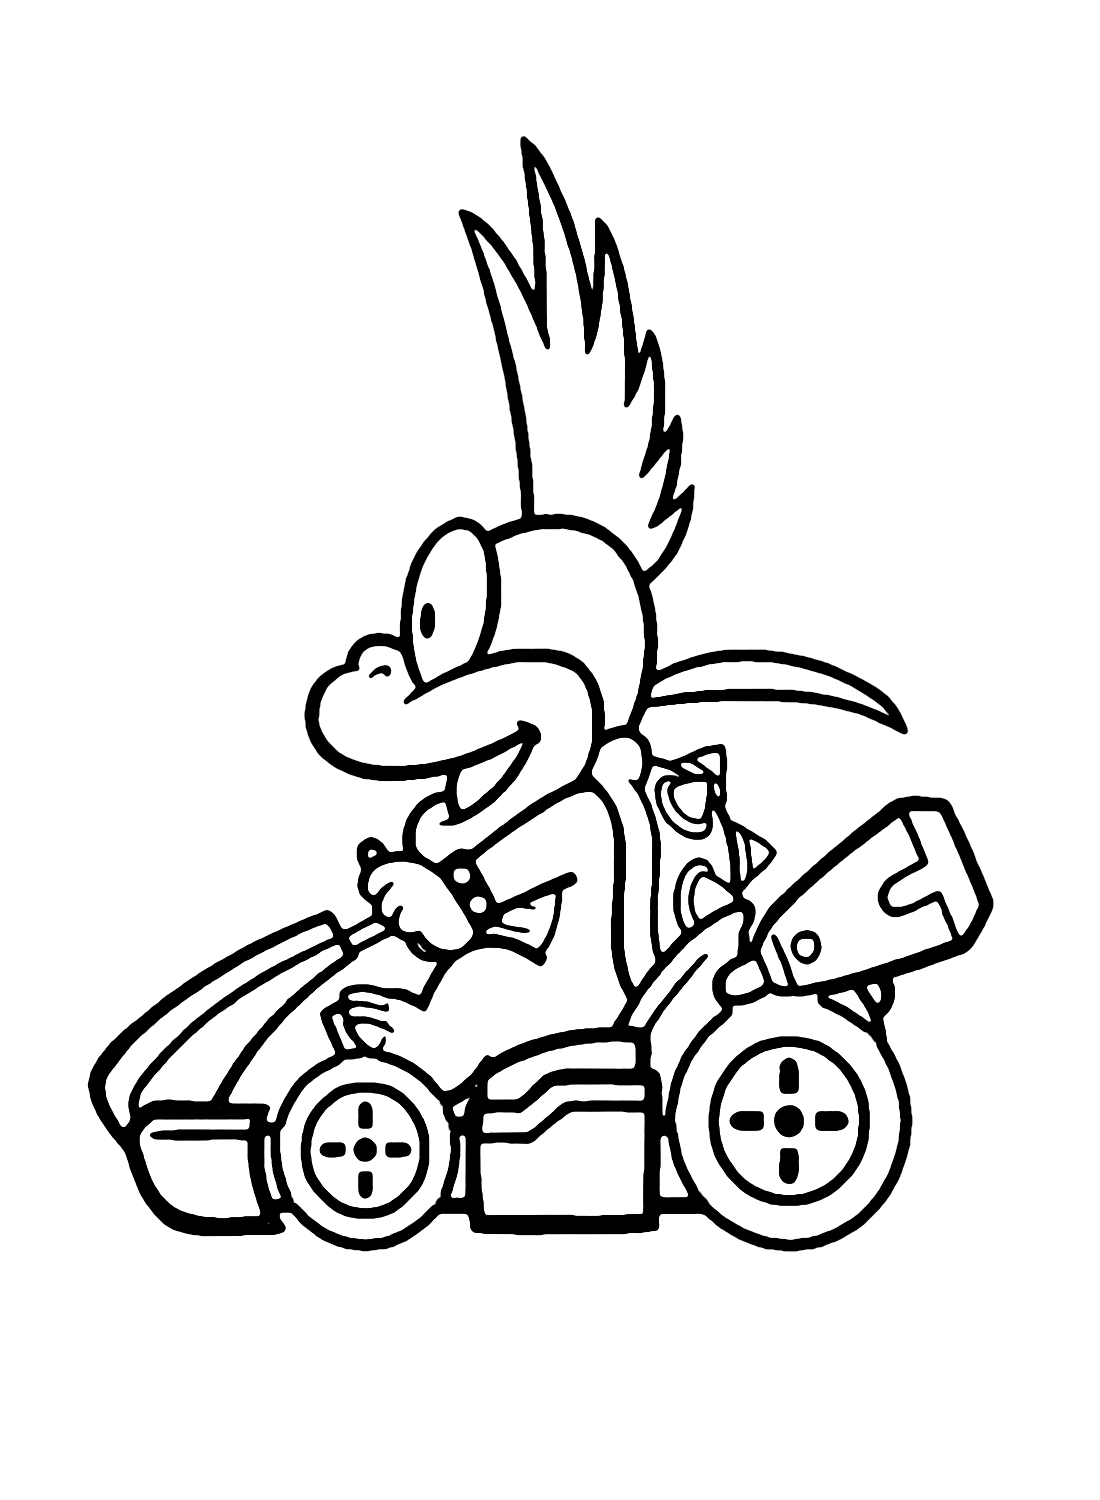 Lemmy Koopa Mario Kart Coloring Pages